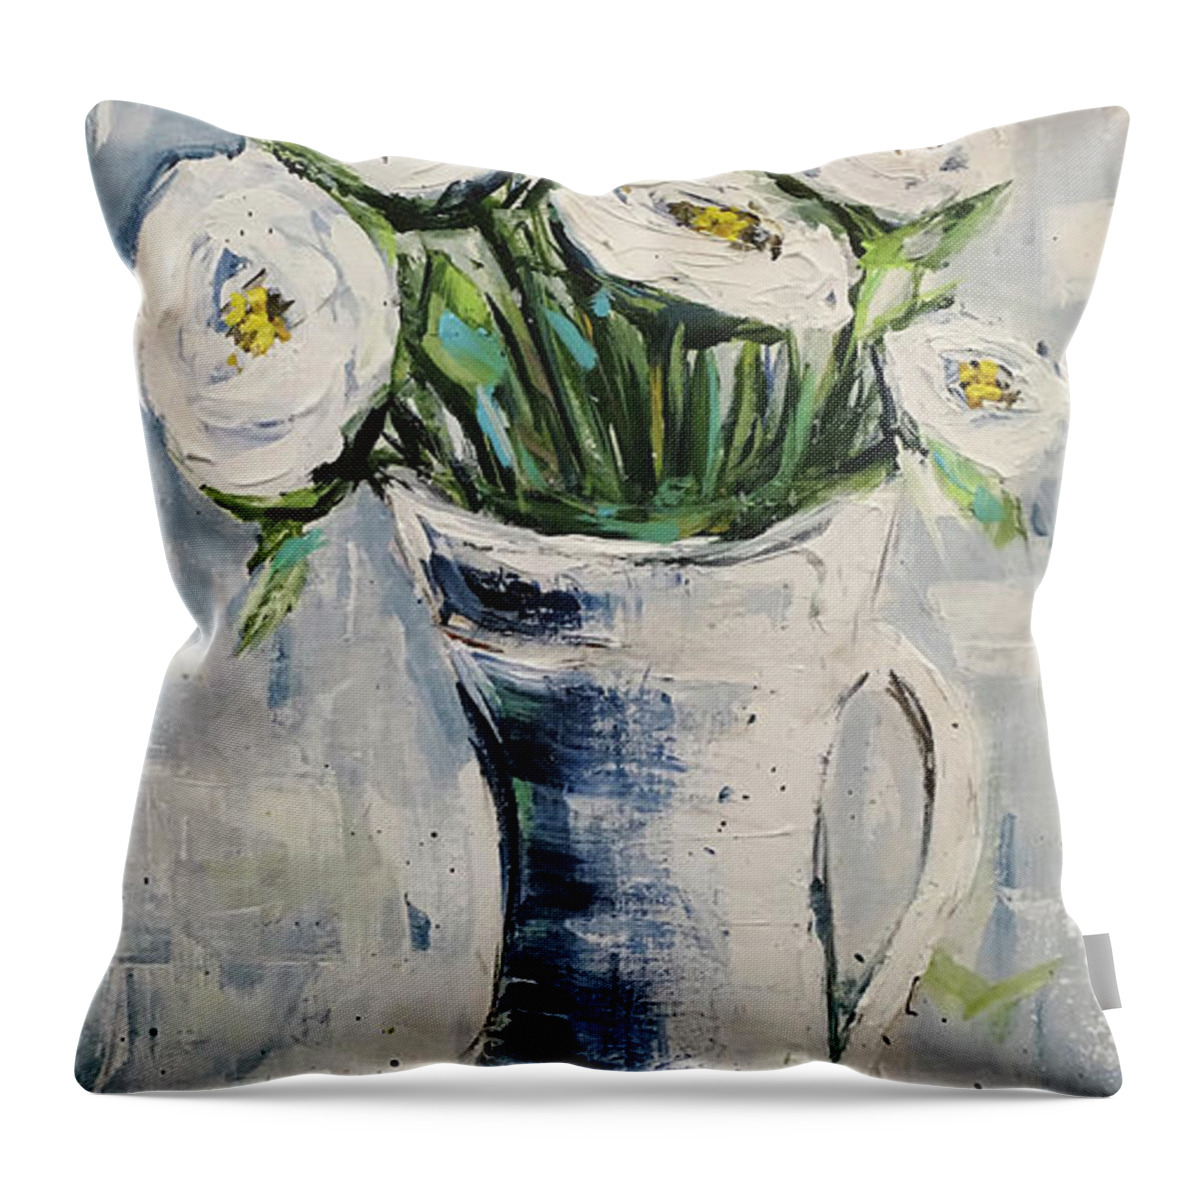 Roses Throw Pillow featuring the painting Shabby Roses 2 by Roxy Rich